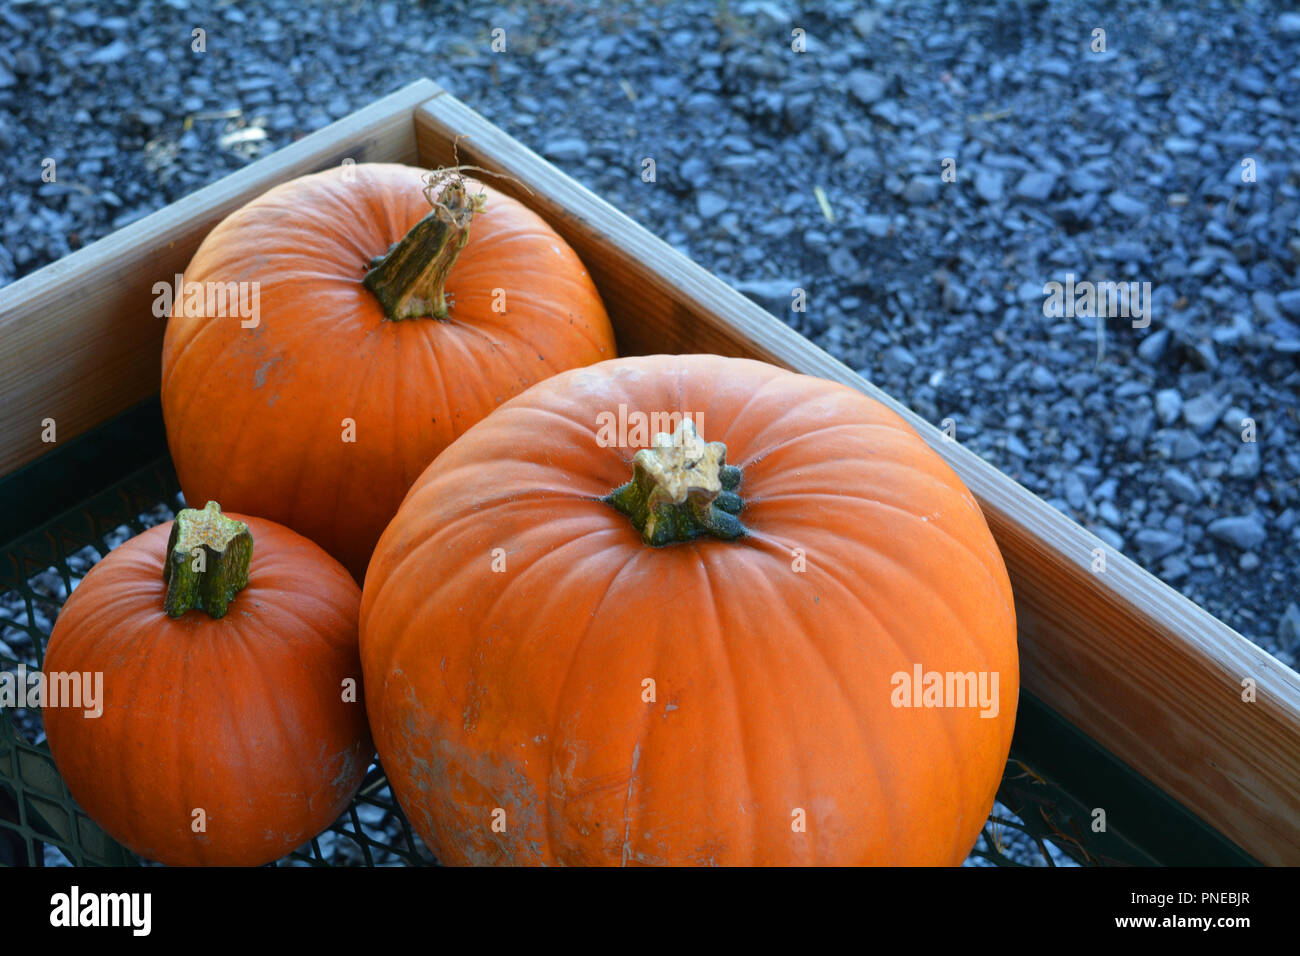 Three pumpkins in a cart after being picked from a pumpkin patch. Stock Photo